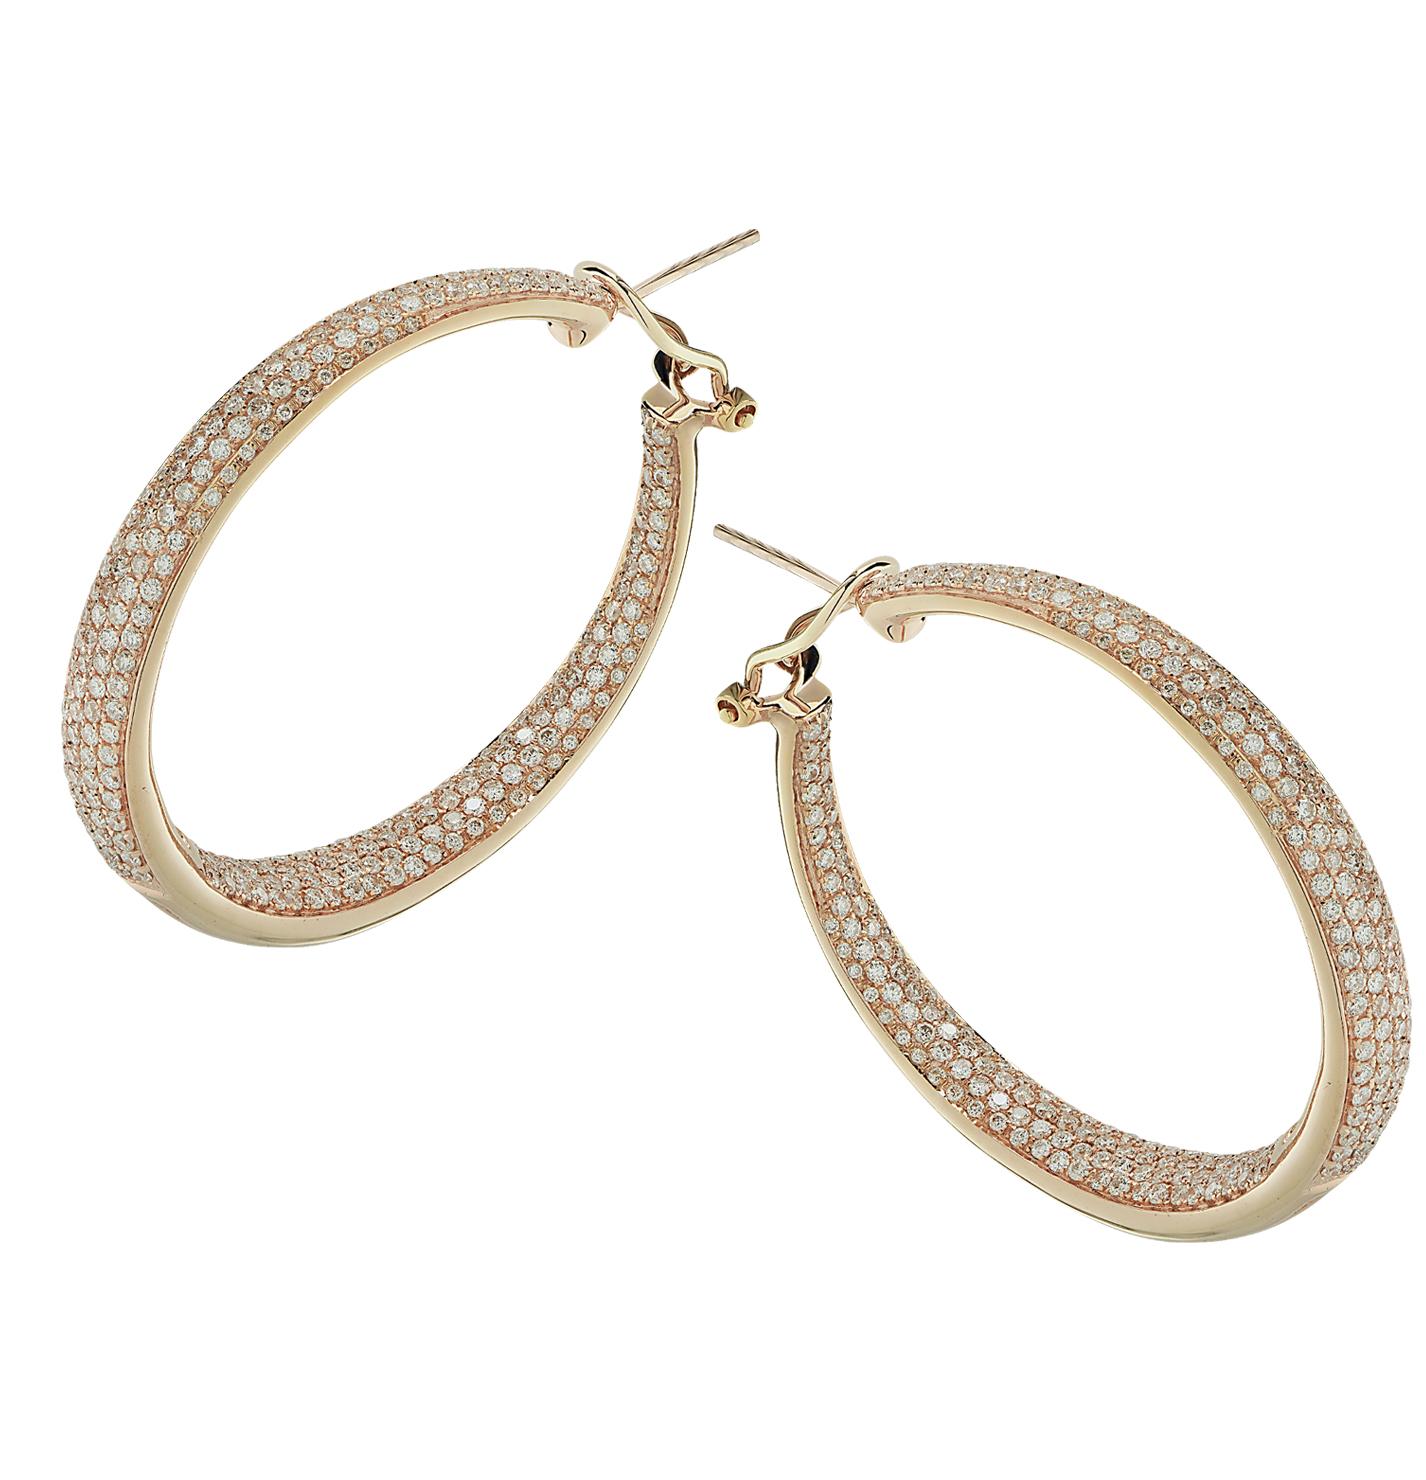 Exquisite Vivid Diamonds In and Out Hoop Earrings crafted in 18 karat rose gold, featuring 250 round brilliant cut diamonds weighing approximately 4.5 carats total, G color, VS clarity. The diamonds are set on the inside and outside of the earrings